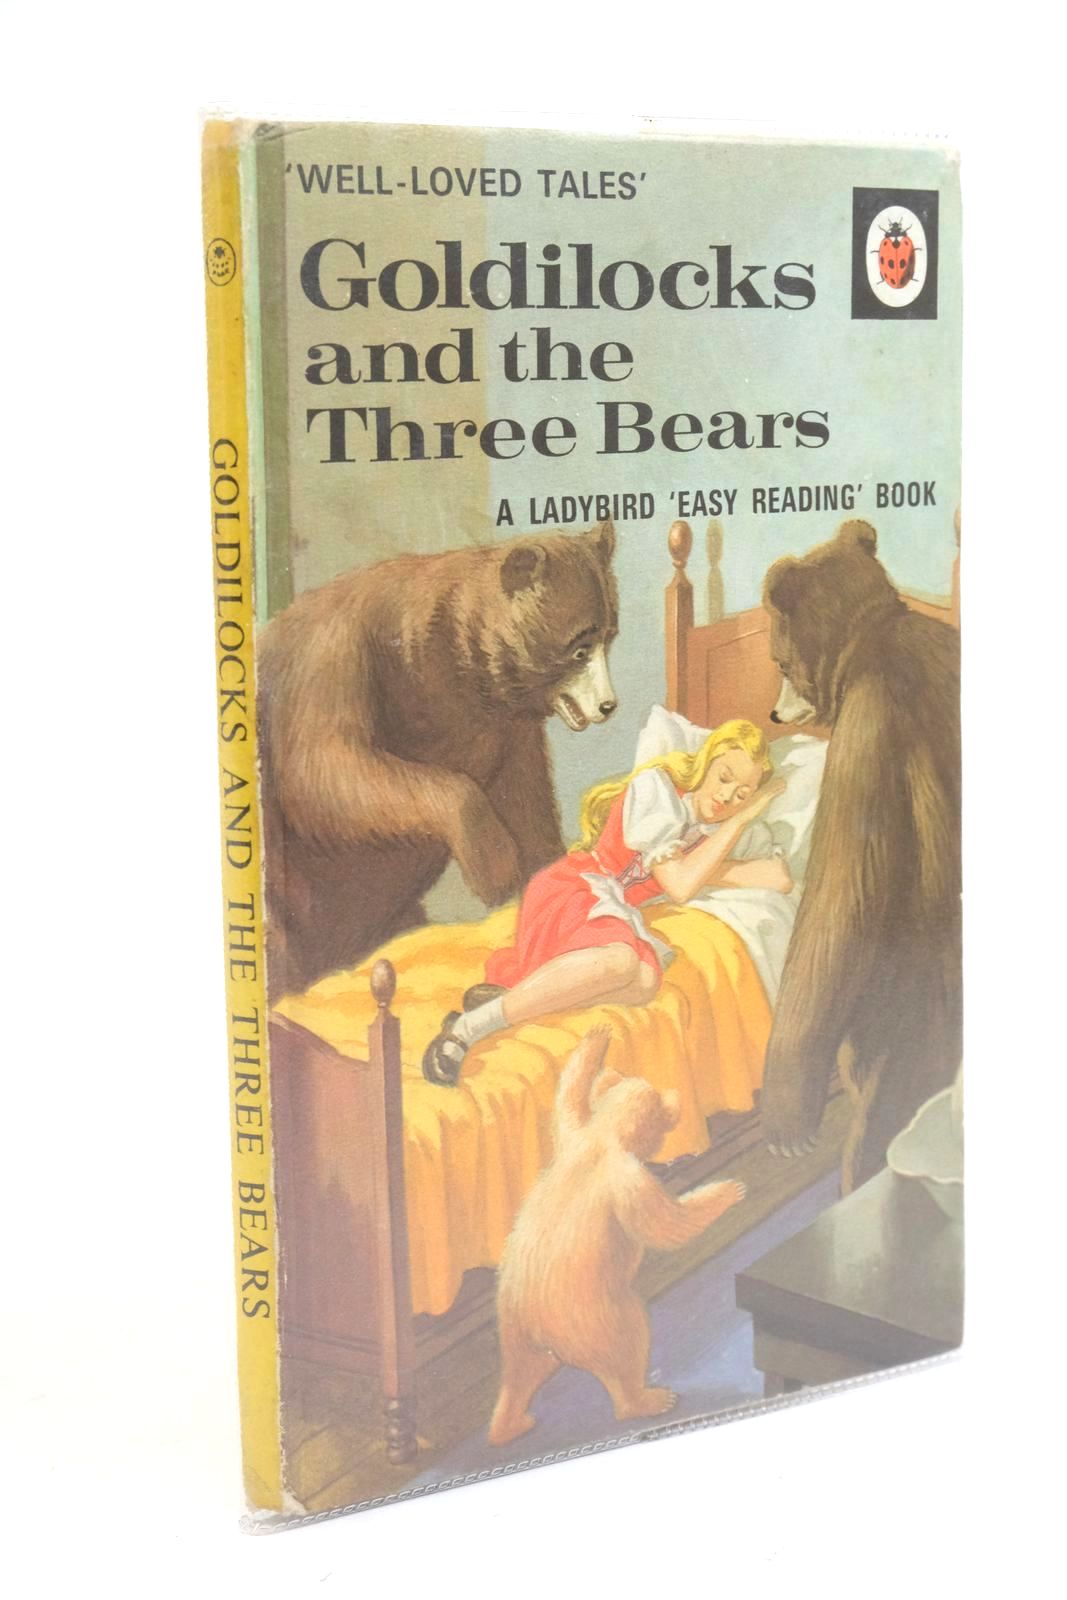 Photo of GOLDILOCKS AND THE THREE BEARS written by Southgate, Vera illustrated by Winter, Eric published by Wills &amp; Hepworth Ltd. (STOCK CODE: 1322374)  for sale by Stella & Rose's Books